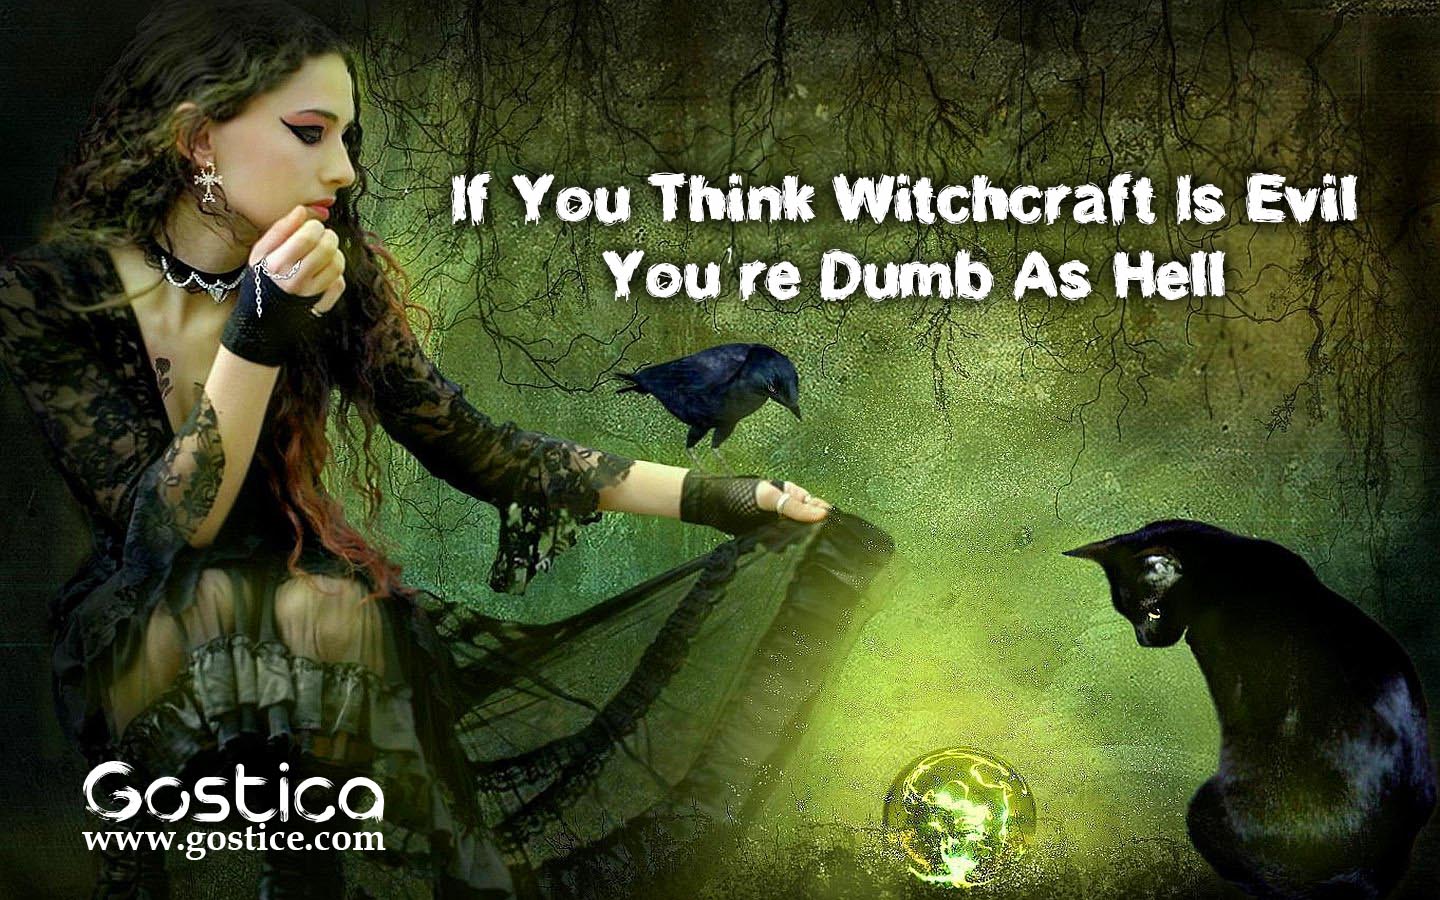 If-You-Think-Witchcraft-Is-Evil-You’re-Dumb-As-Hell.jpg